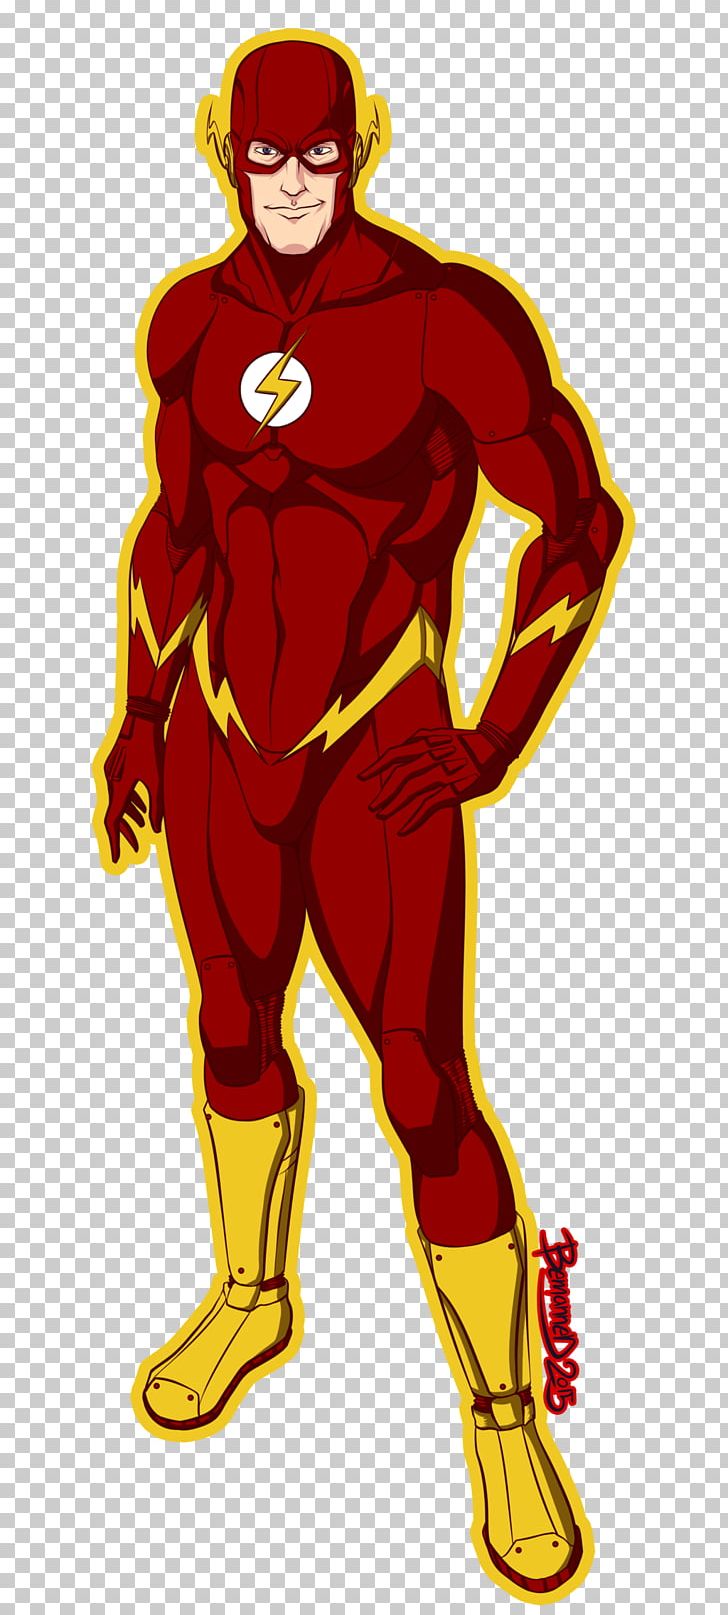 Superhero Cartoon Muscle PNG, Clipart, Art, Cartoon, Costume Design, Fictional Character, Joint Free PNG Download